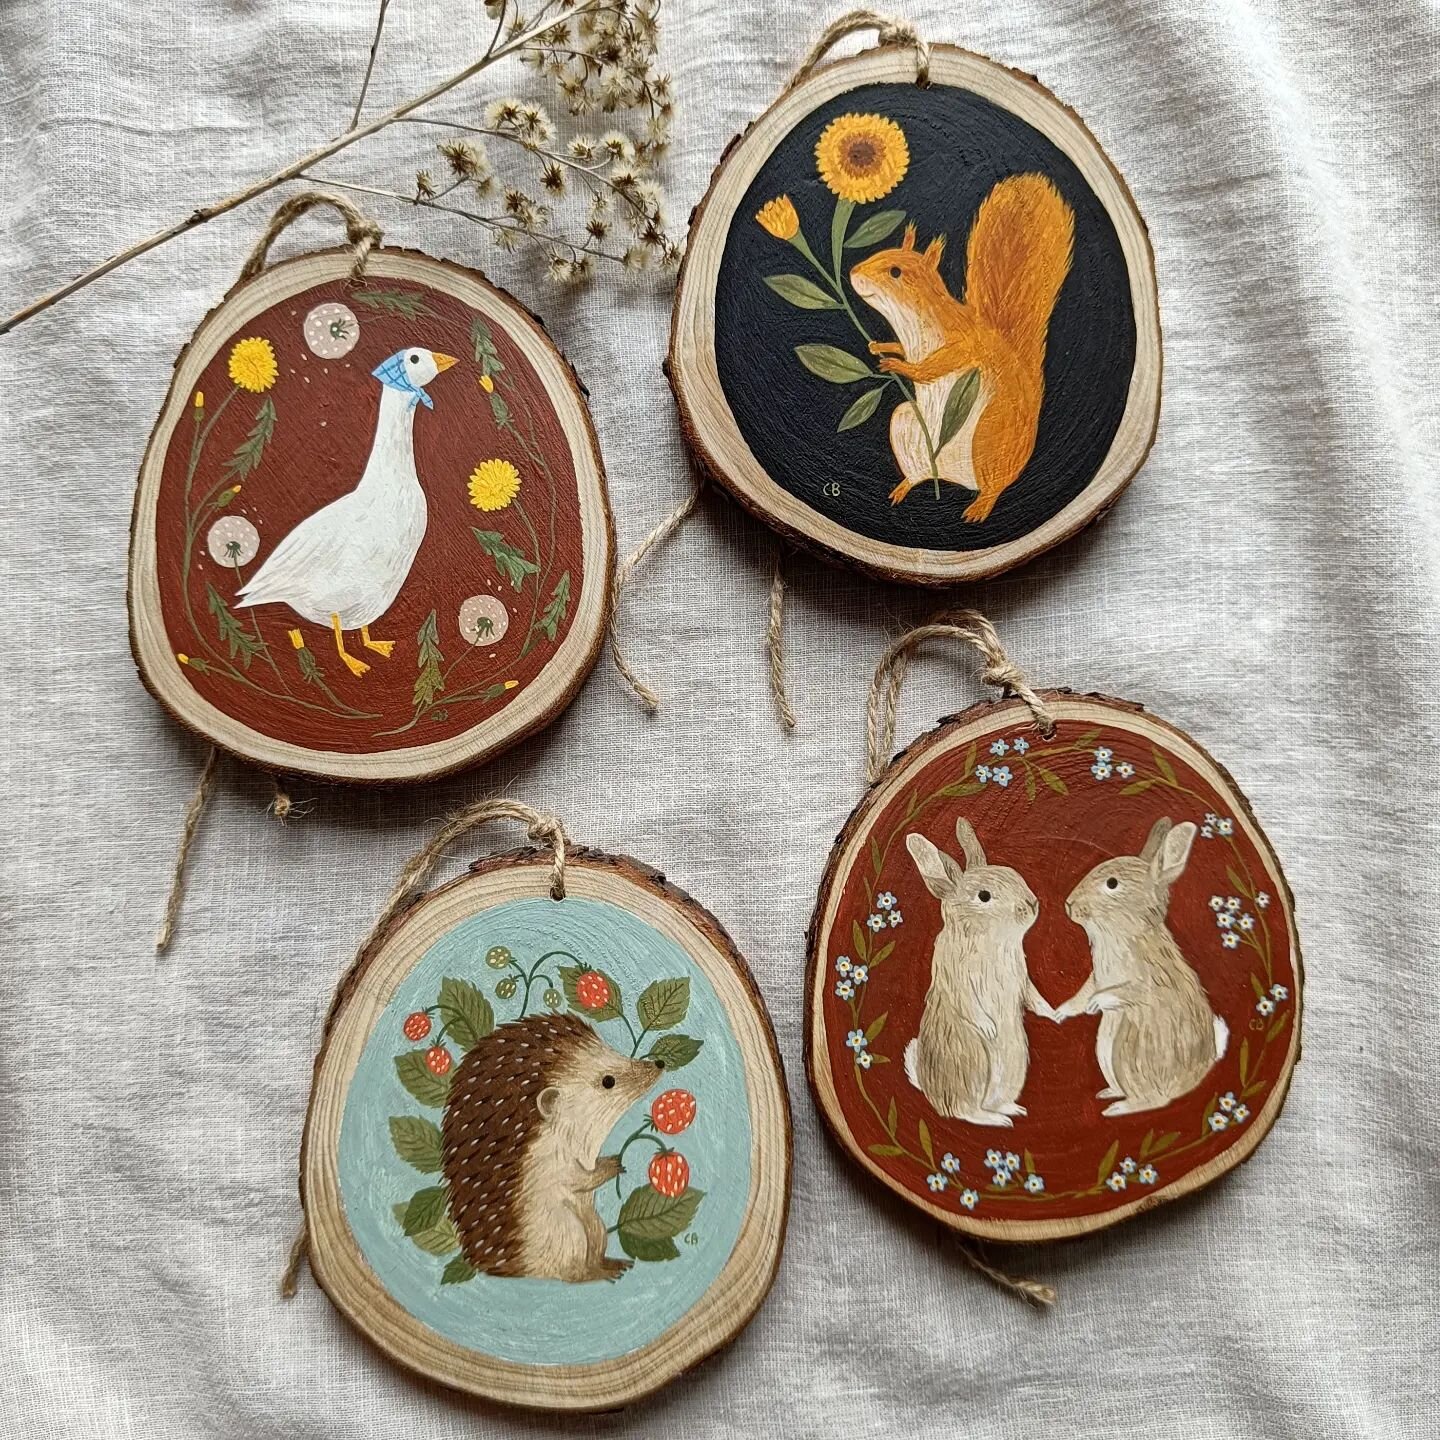 Wood slices, Spring collection 🌼 
Two designs are still available and looking for a home!
.
.
.
.
#gouachepainting #animalart
#inspiredbynature #illustrationwork #natureinspiration #woodlandanimals